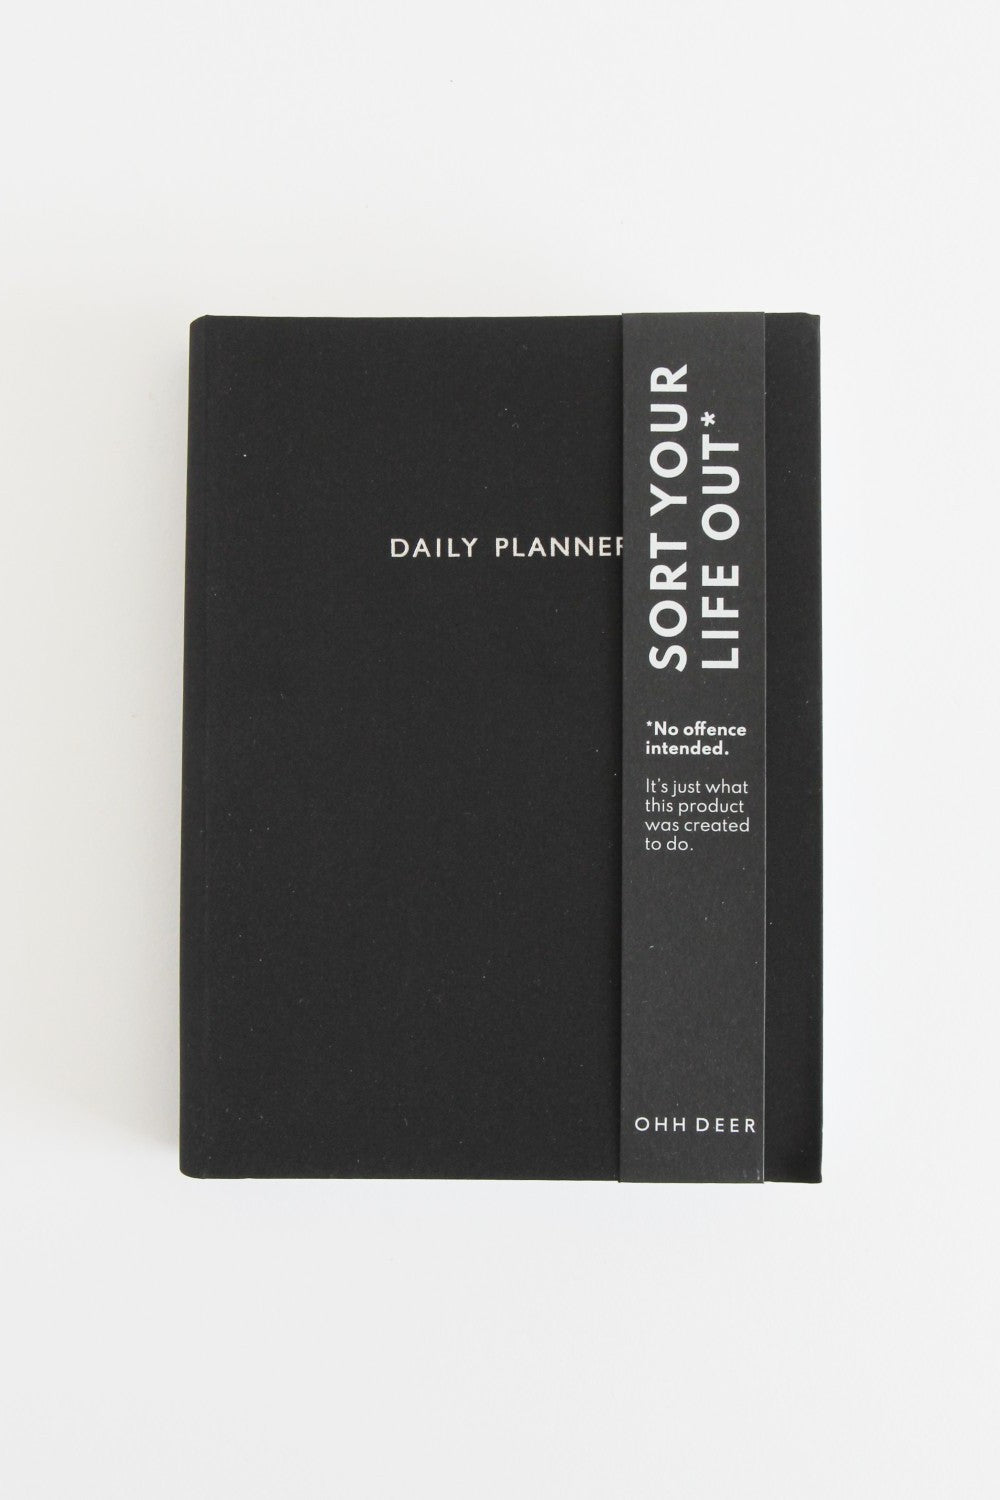 Daily Planner  / Black